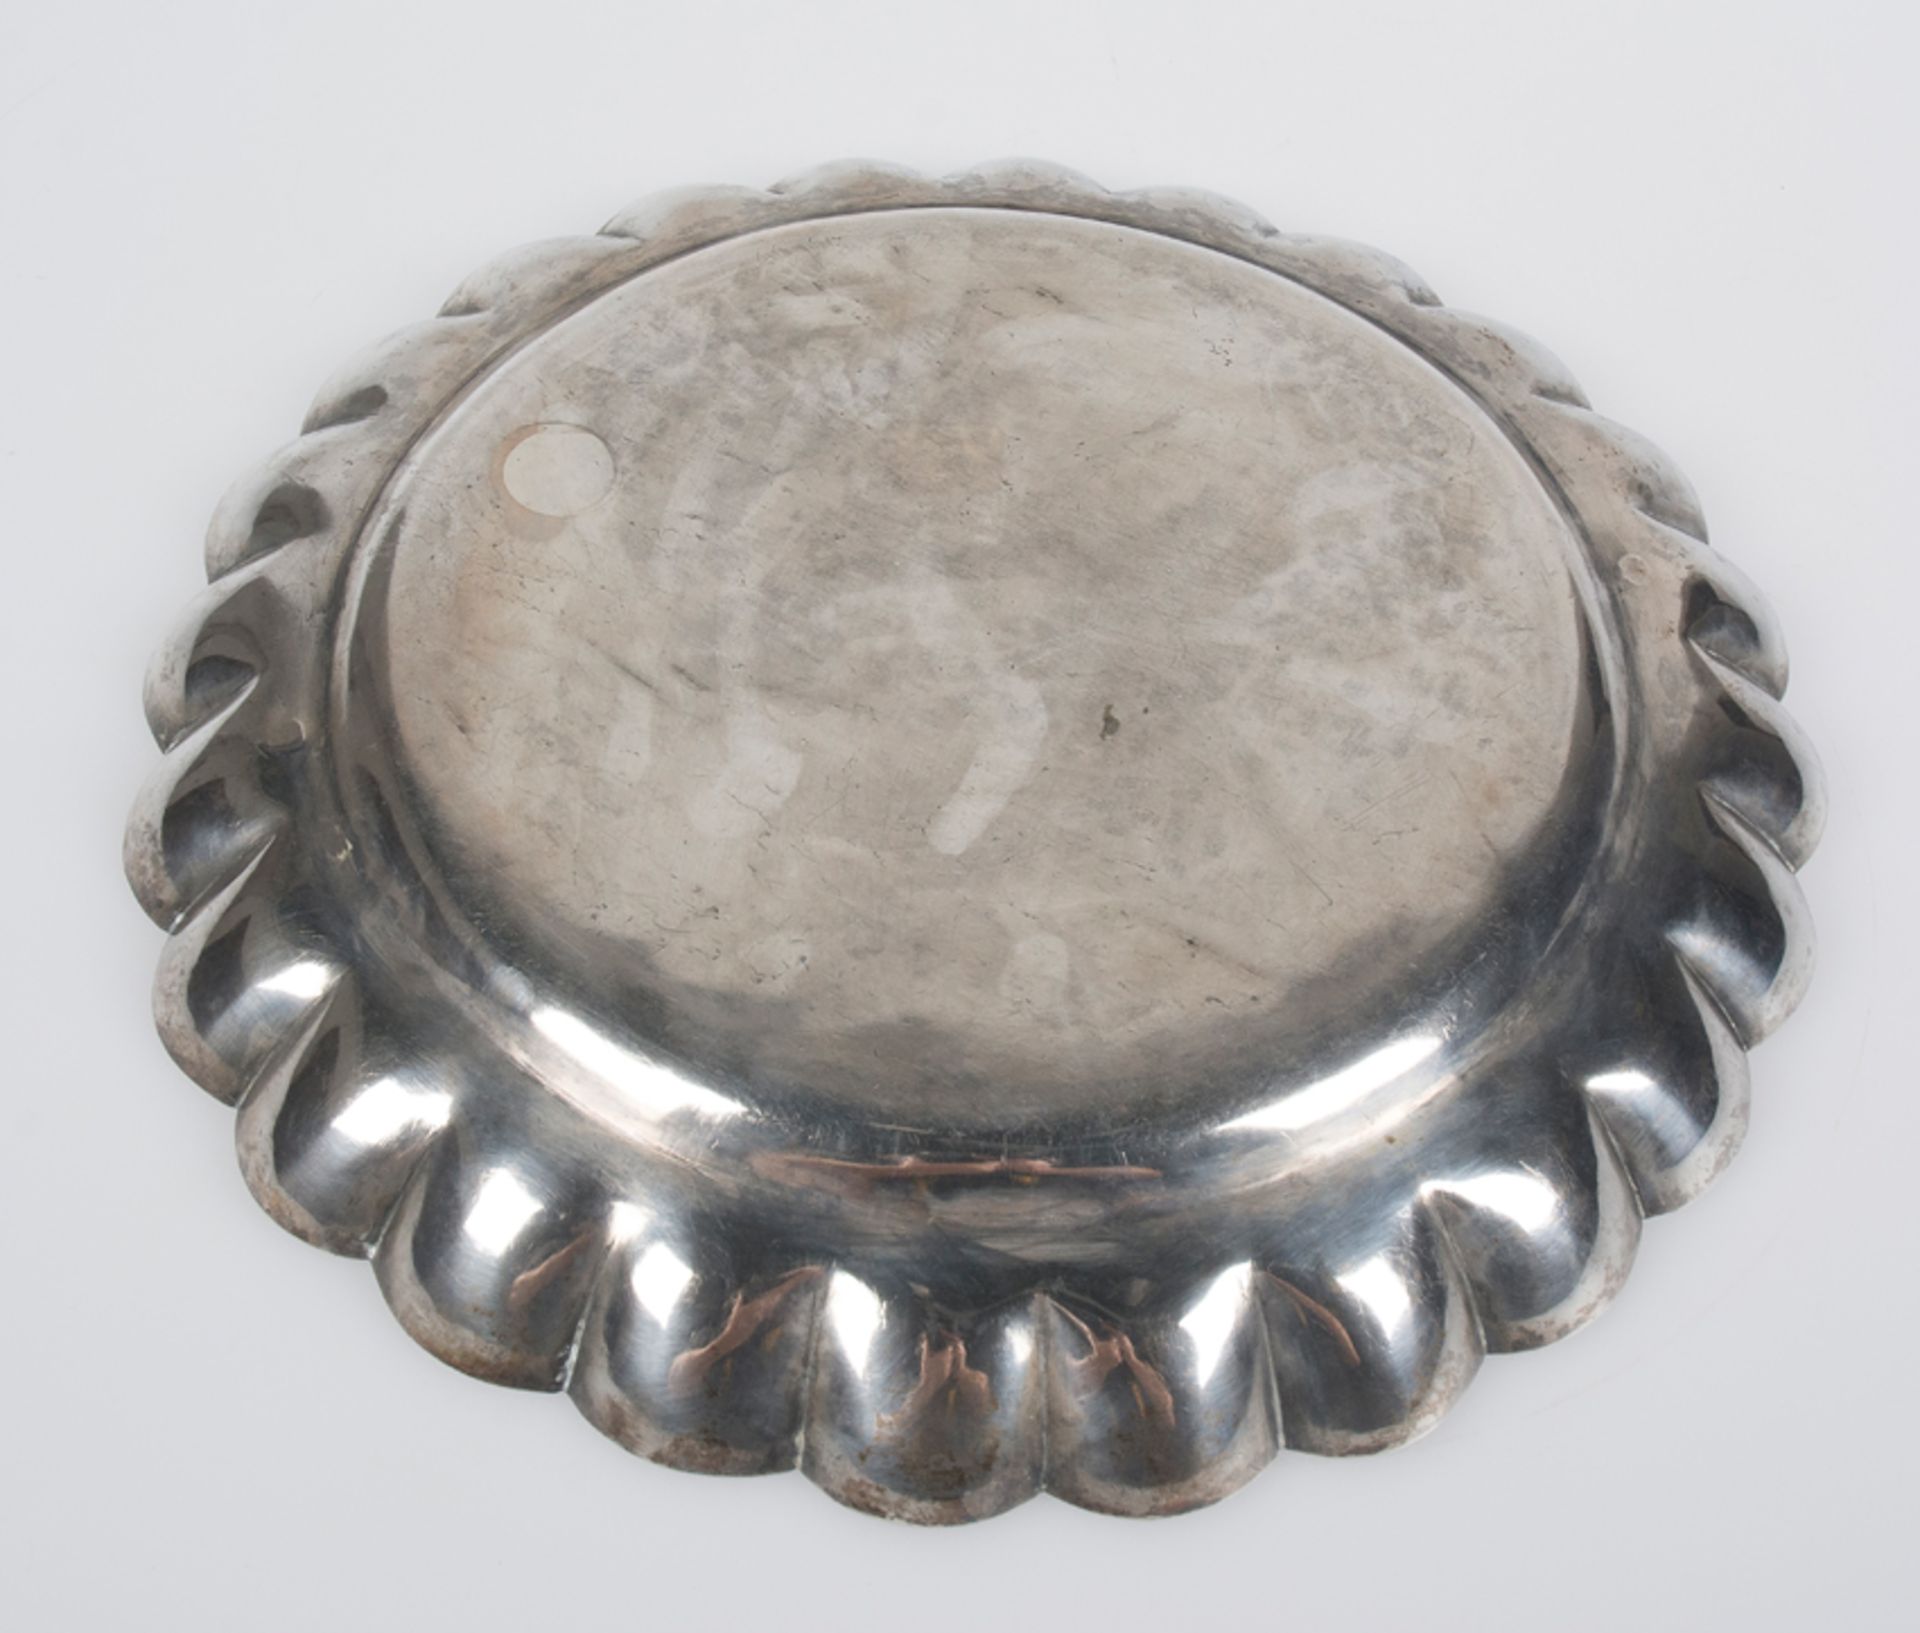 Large silver plate. Colonial work. Possibly Guatemala or Leon, Nicaragua. 18th century. - Image 4 of 6